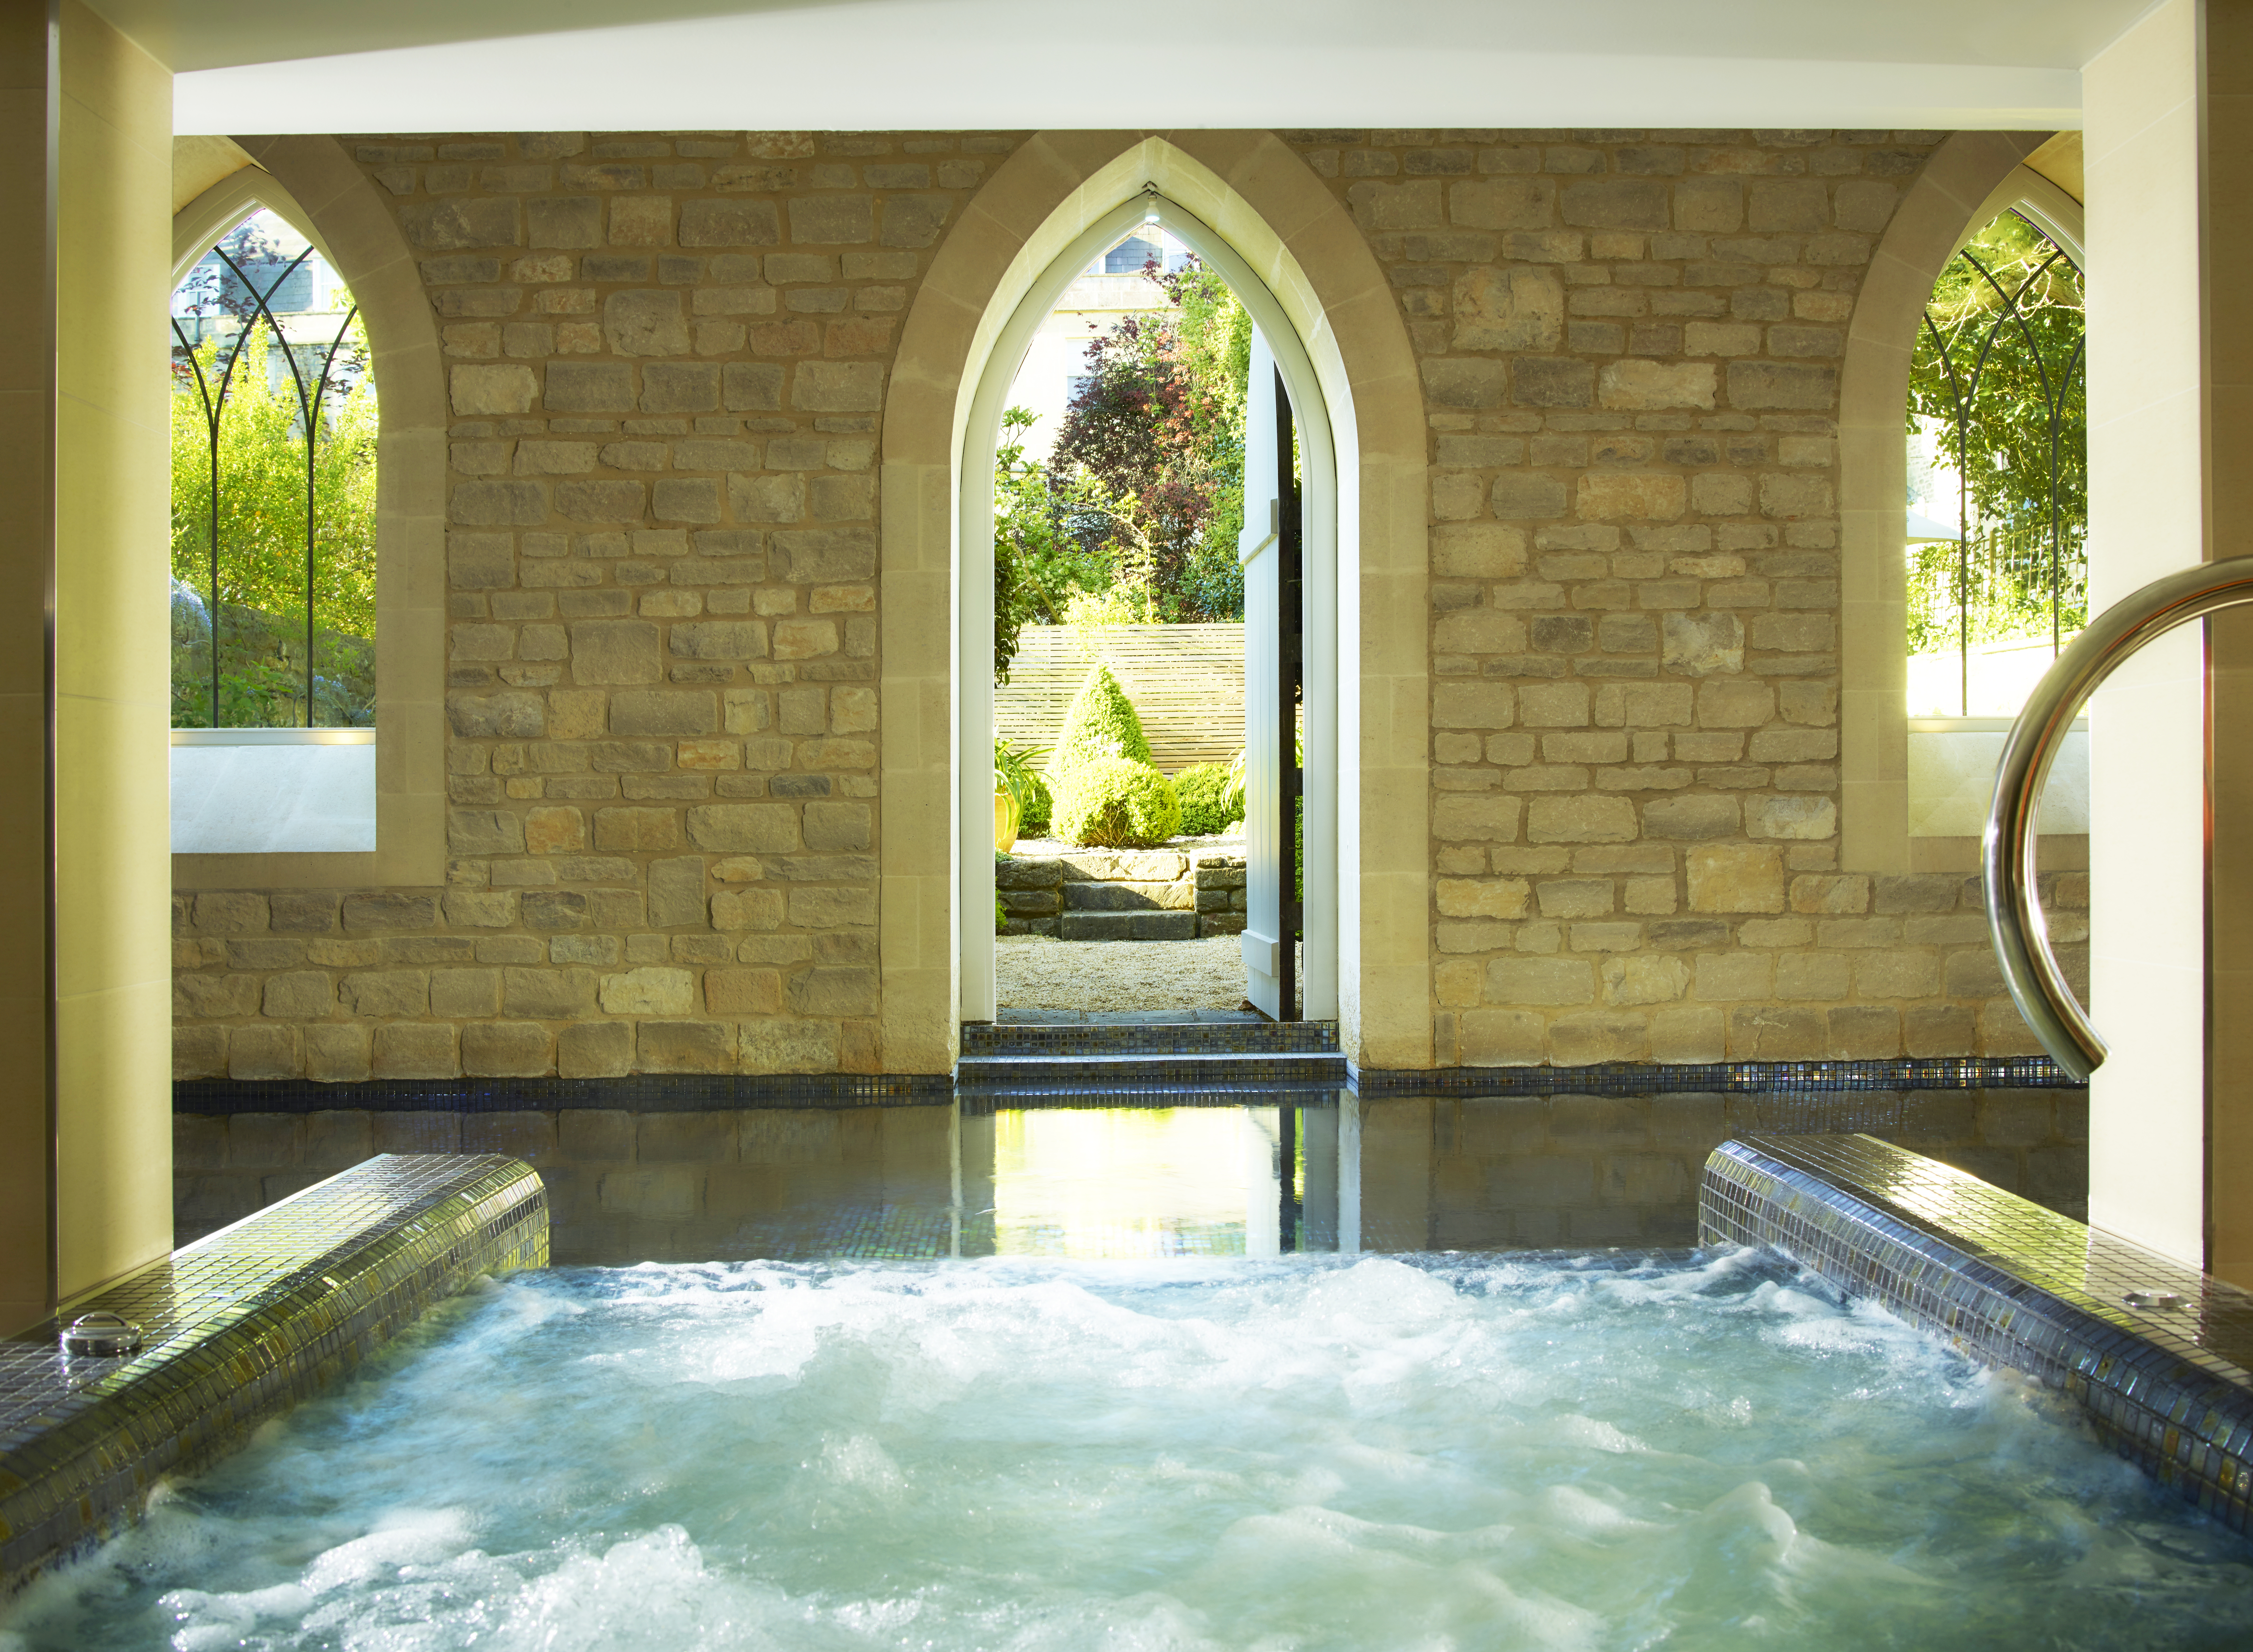 Taittinger Champagne Spa Retreat , The Royal Crescent Hotel And Spa